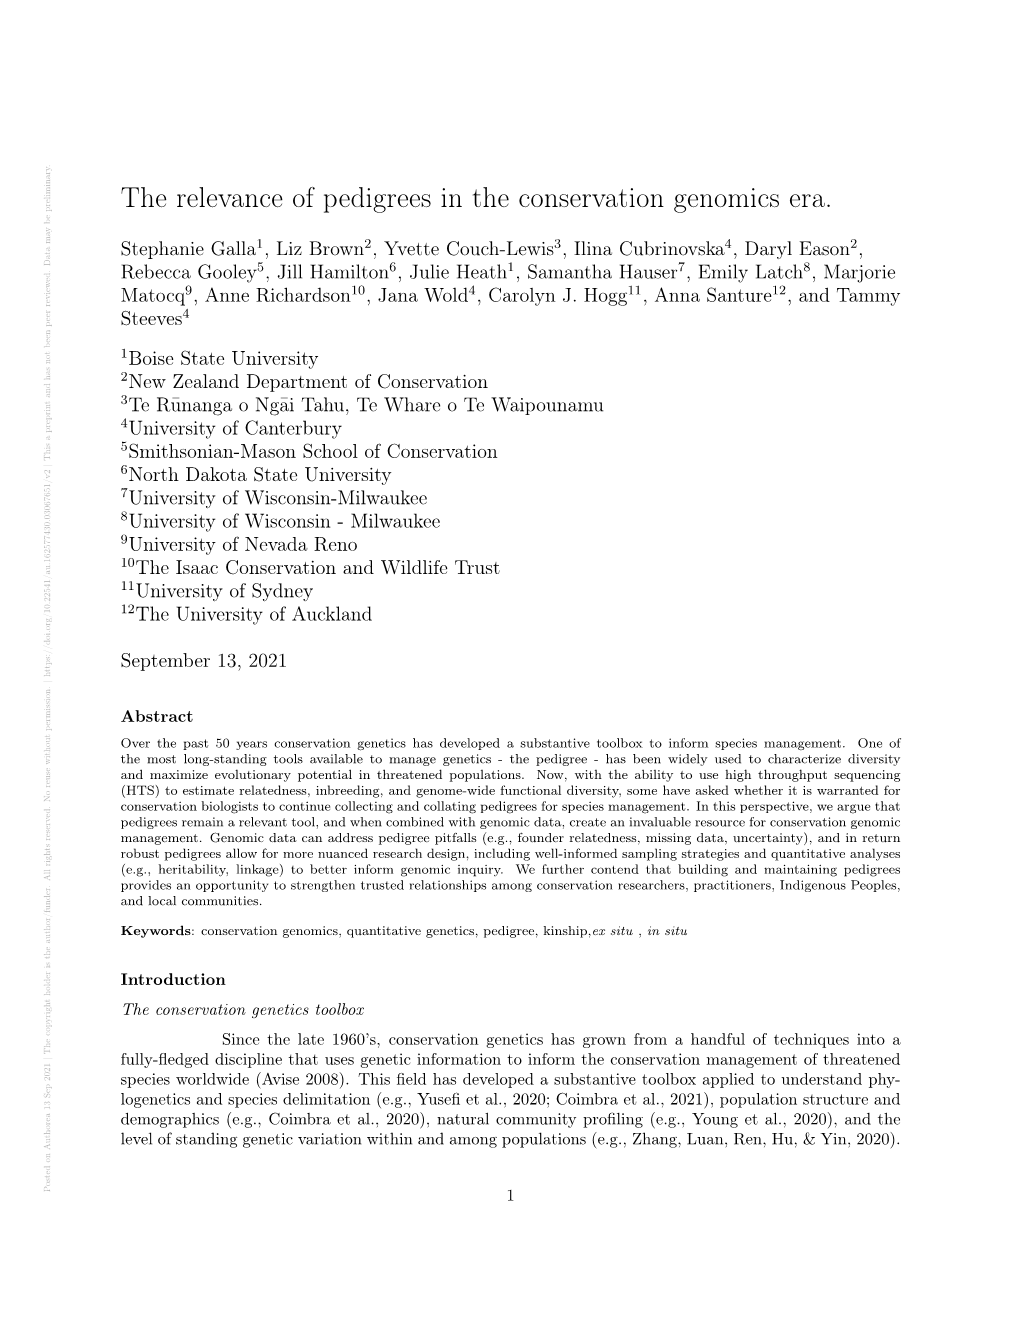 The Relevance of Pedigrees in the Conservation Genomics Era